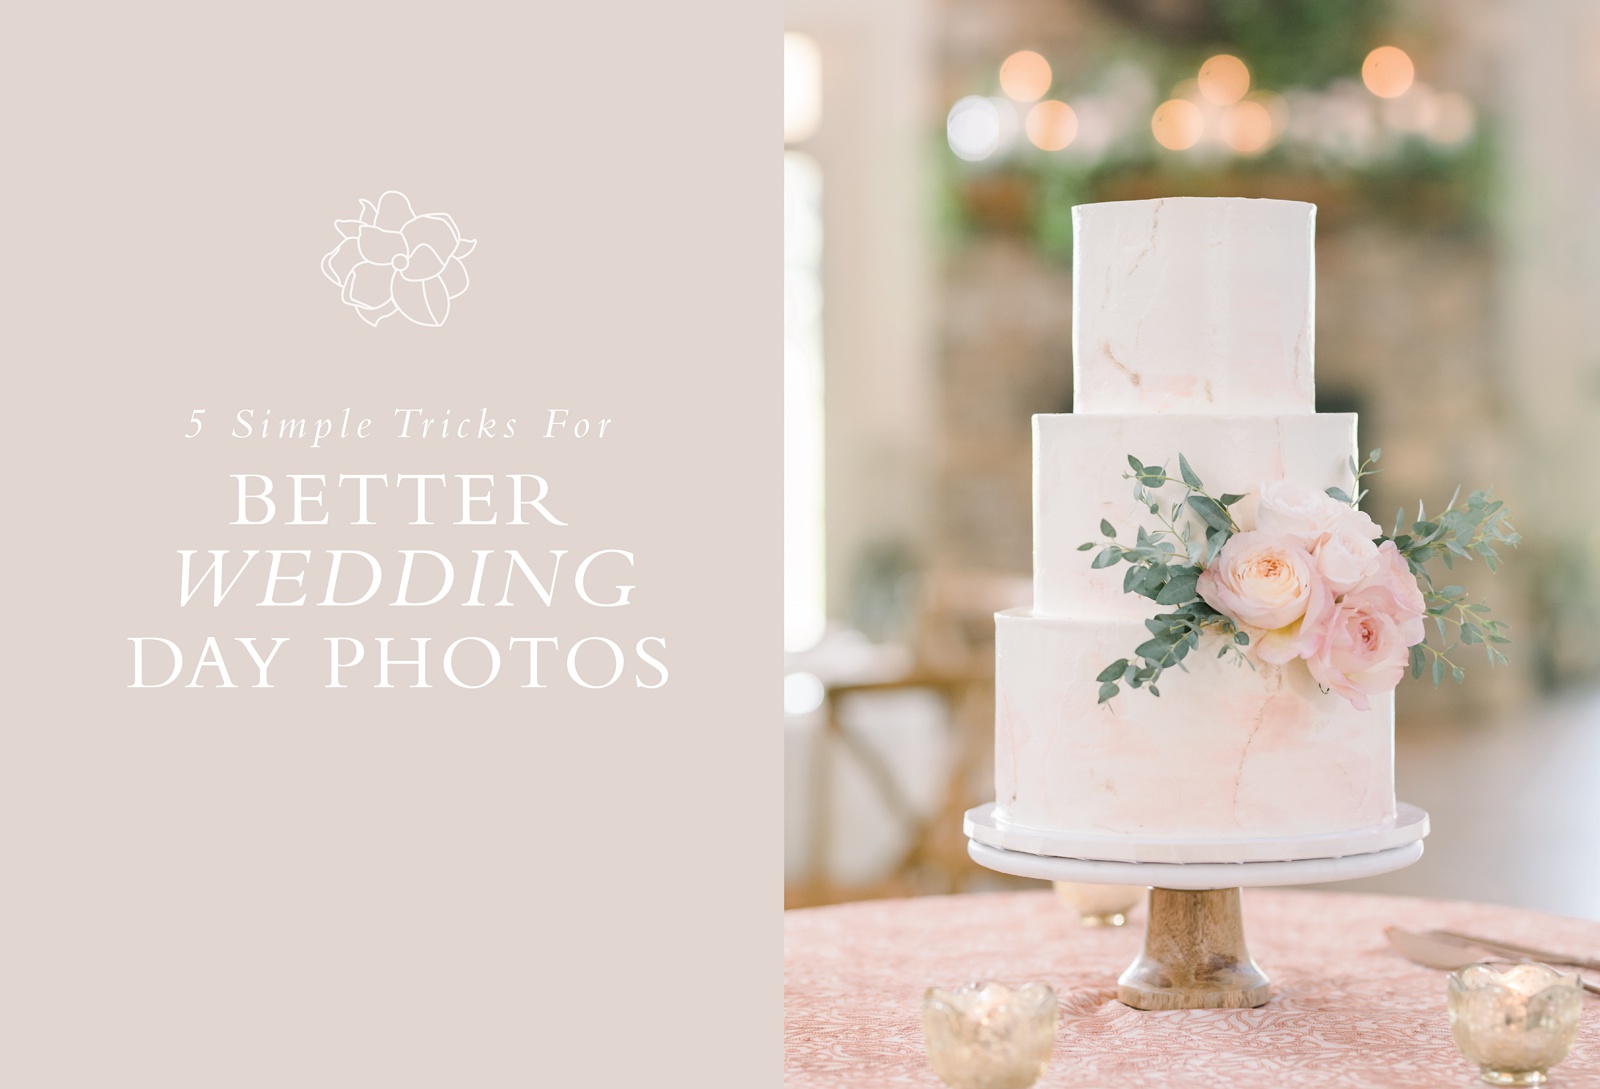 tips for wedding photographers to create better photos